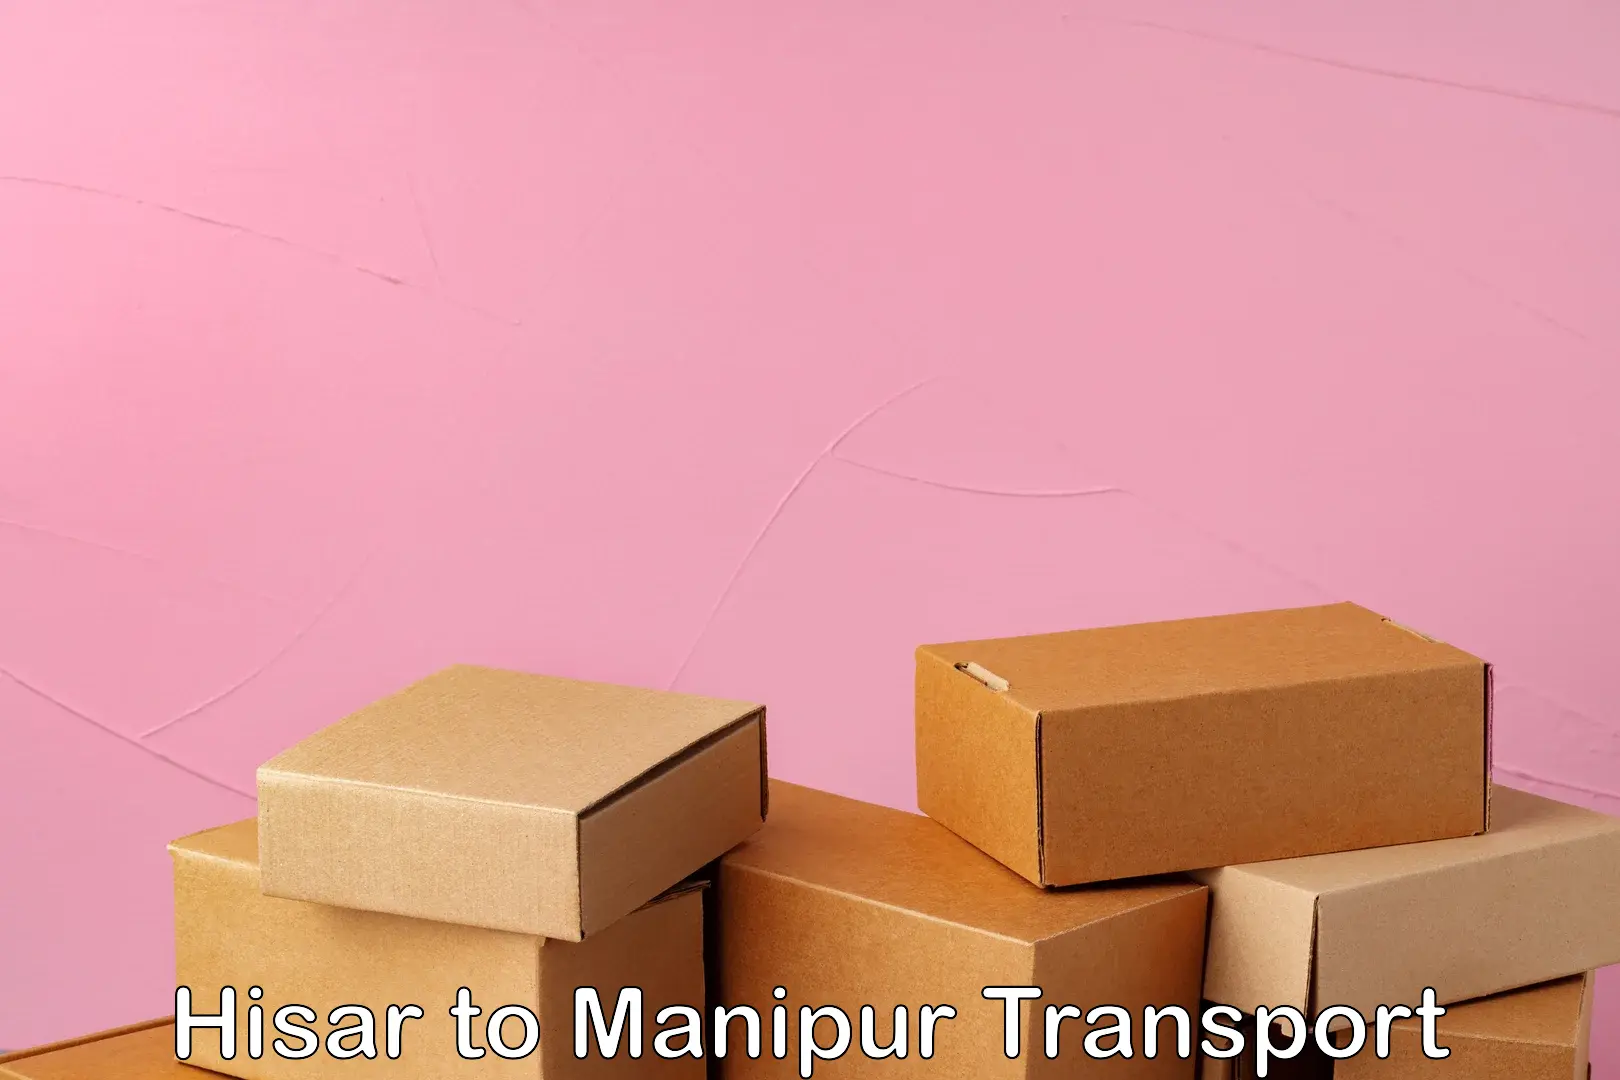 Commercial transport service Hisar to Manipur